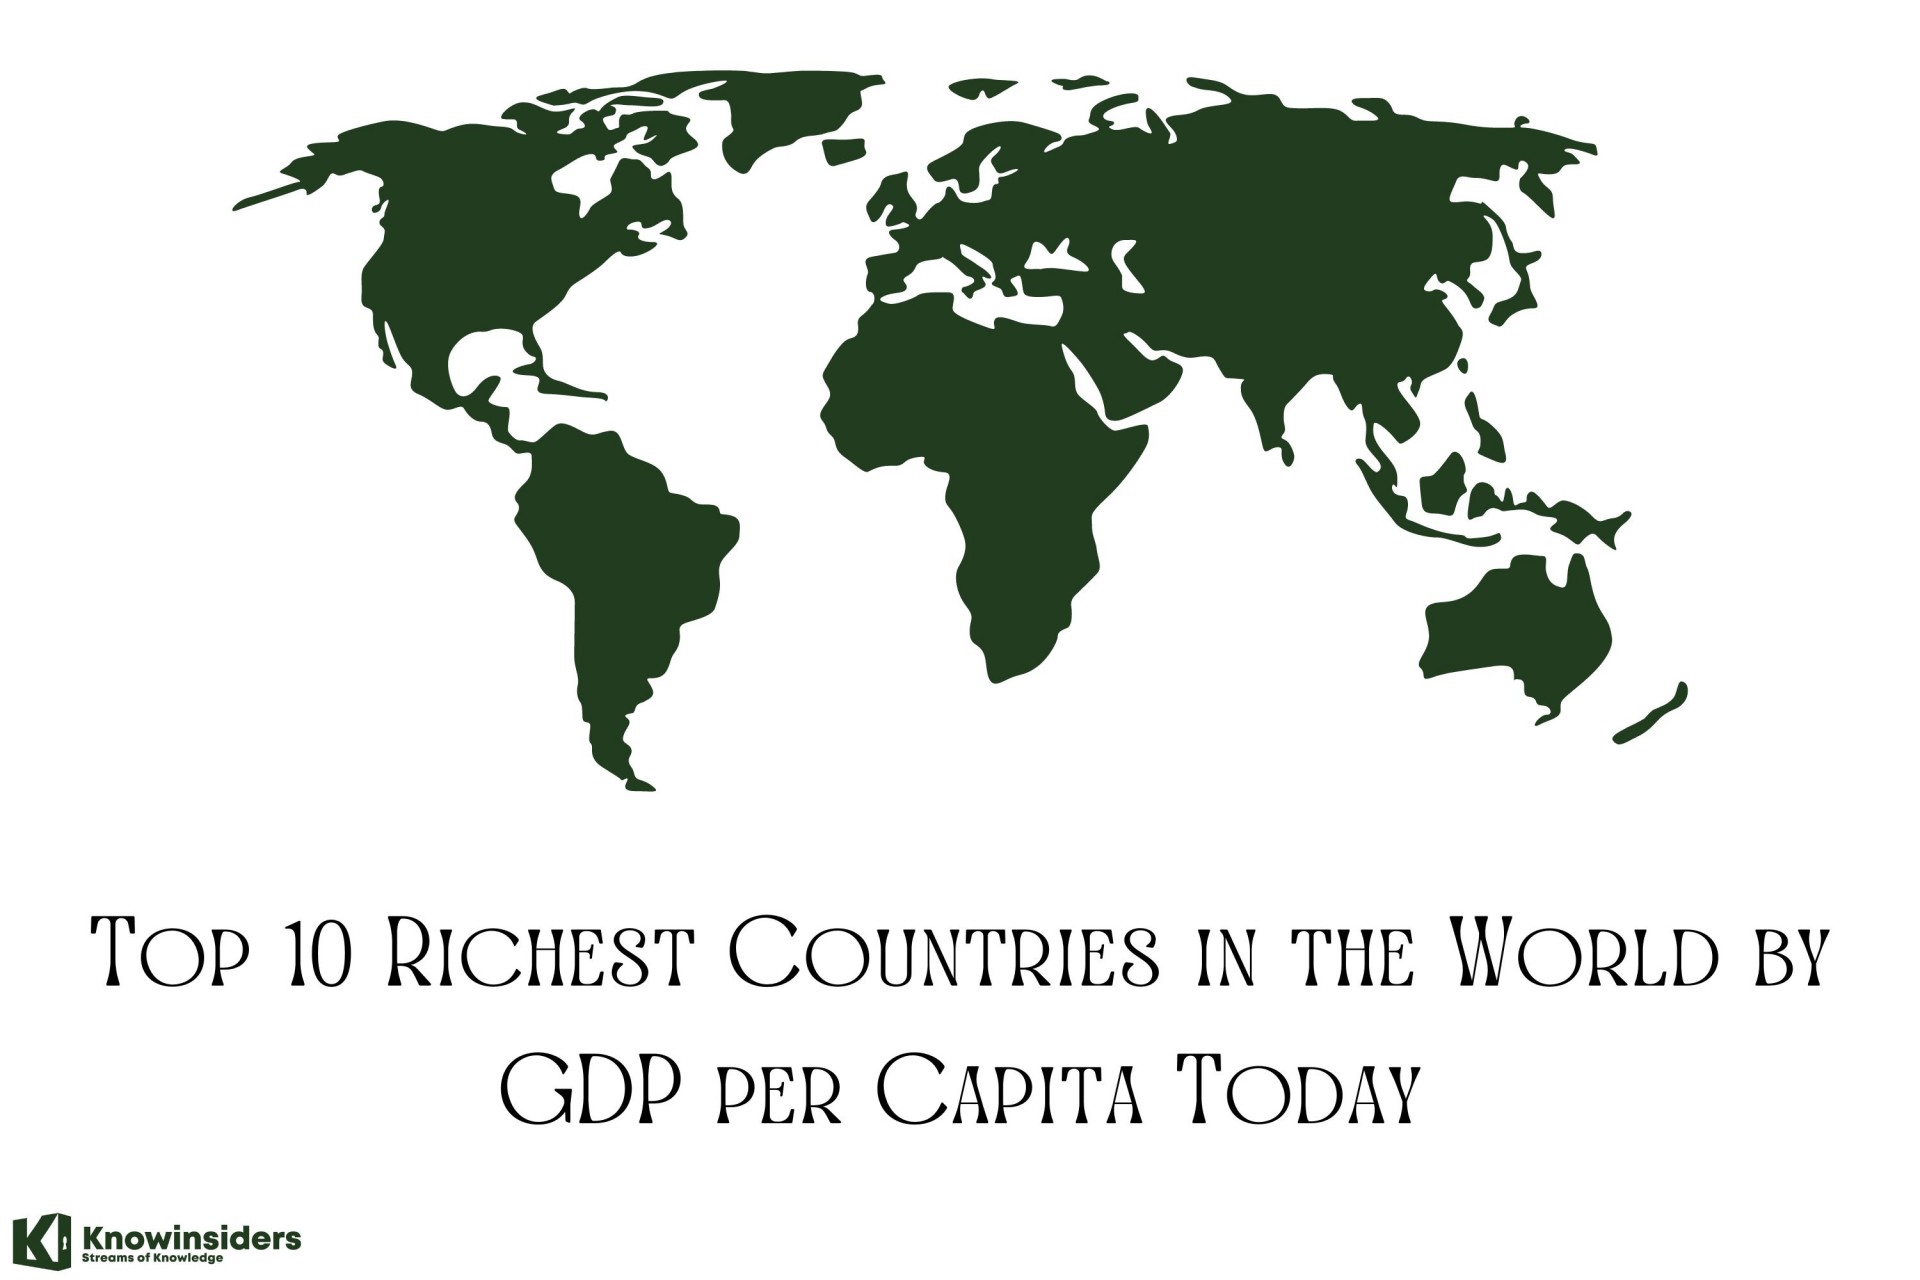 Top 10 Richest Countries in the World by GDP per Capita Today